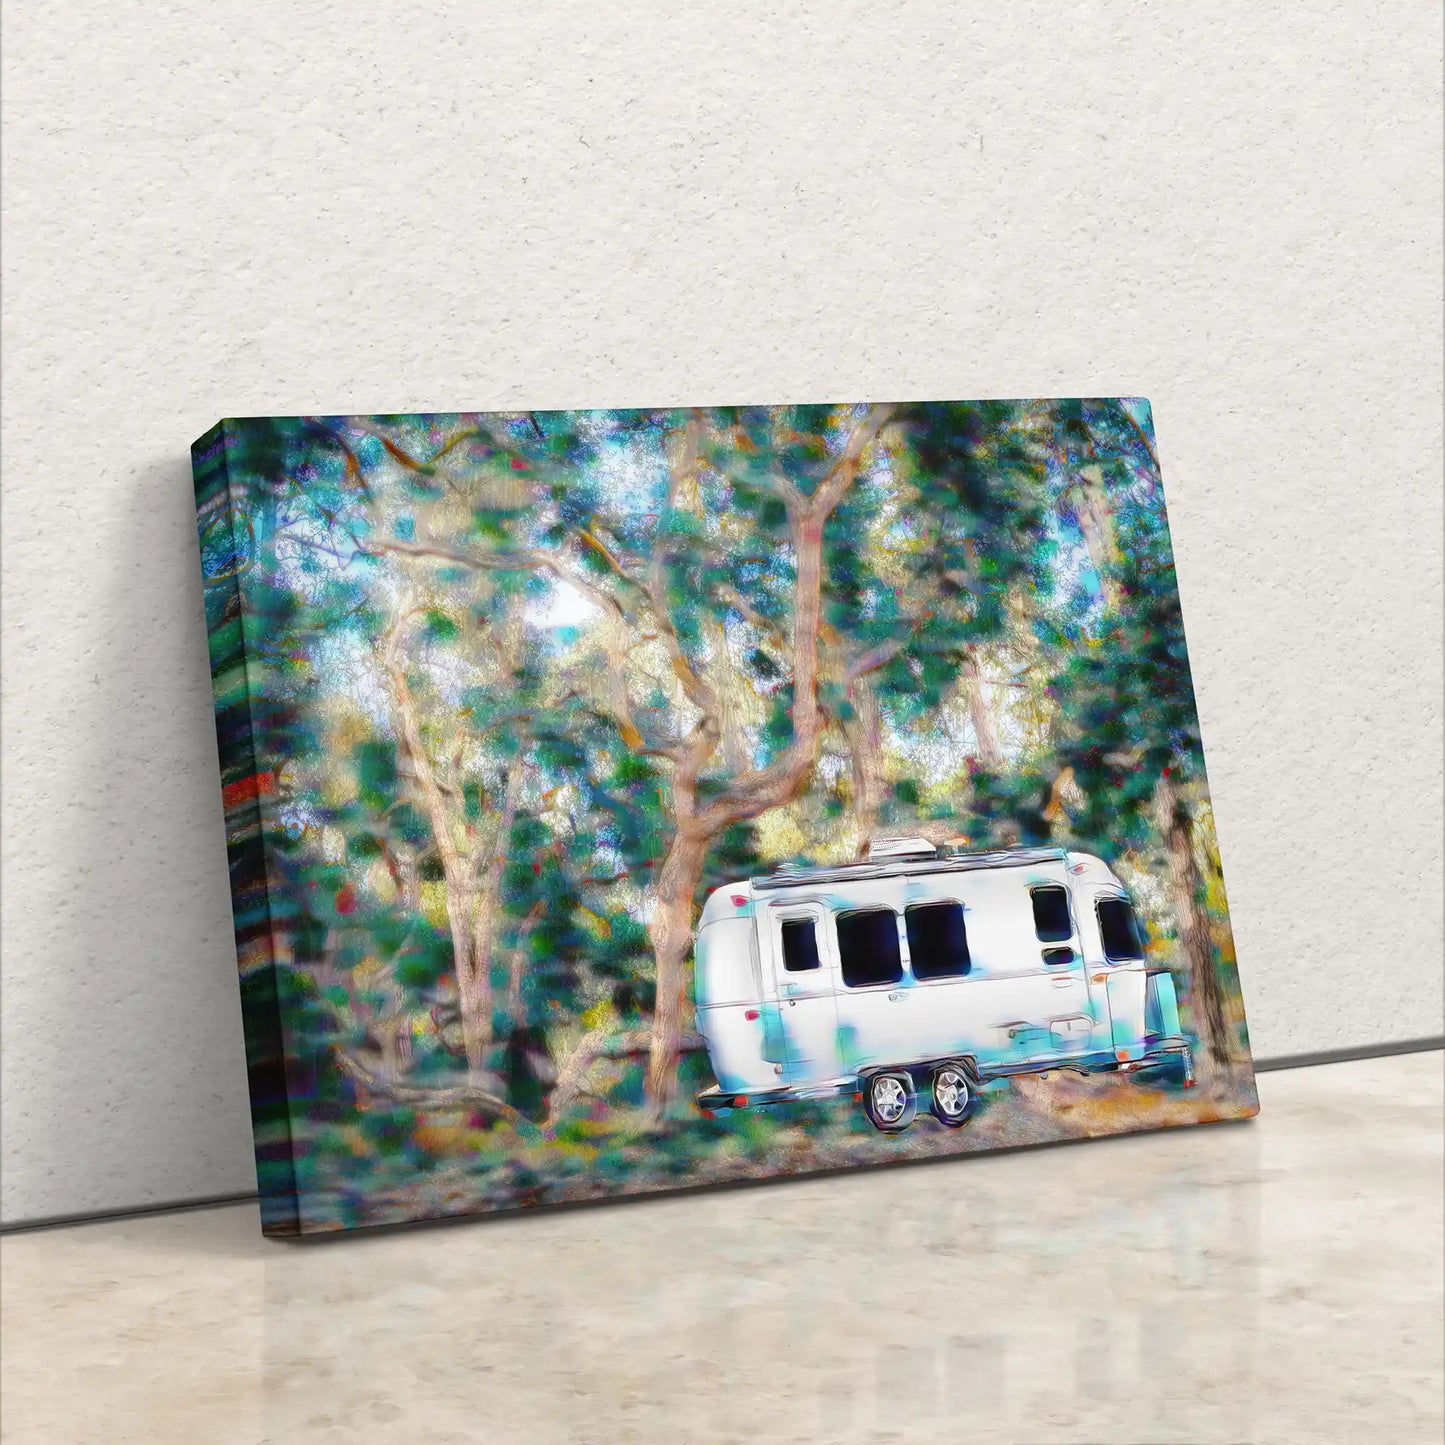 Airstream Under a Coast Live Oak Tree Art Canvas leaning on wall